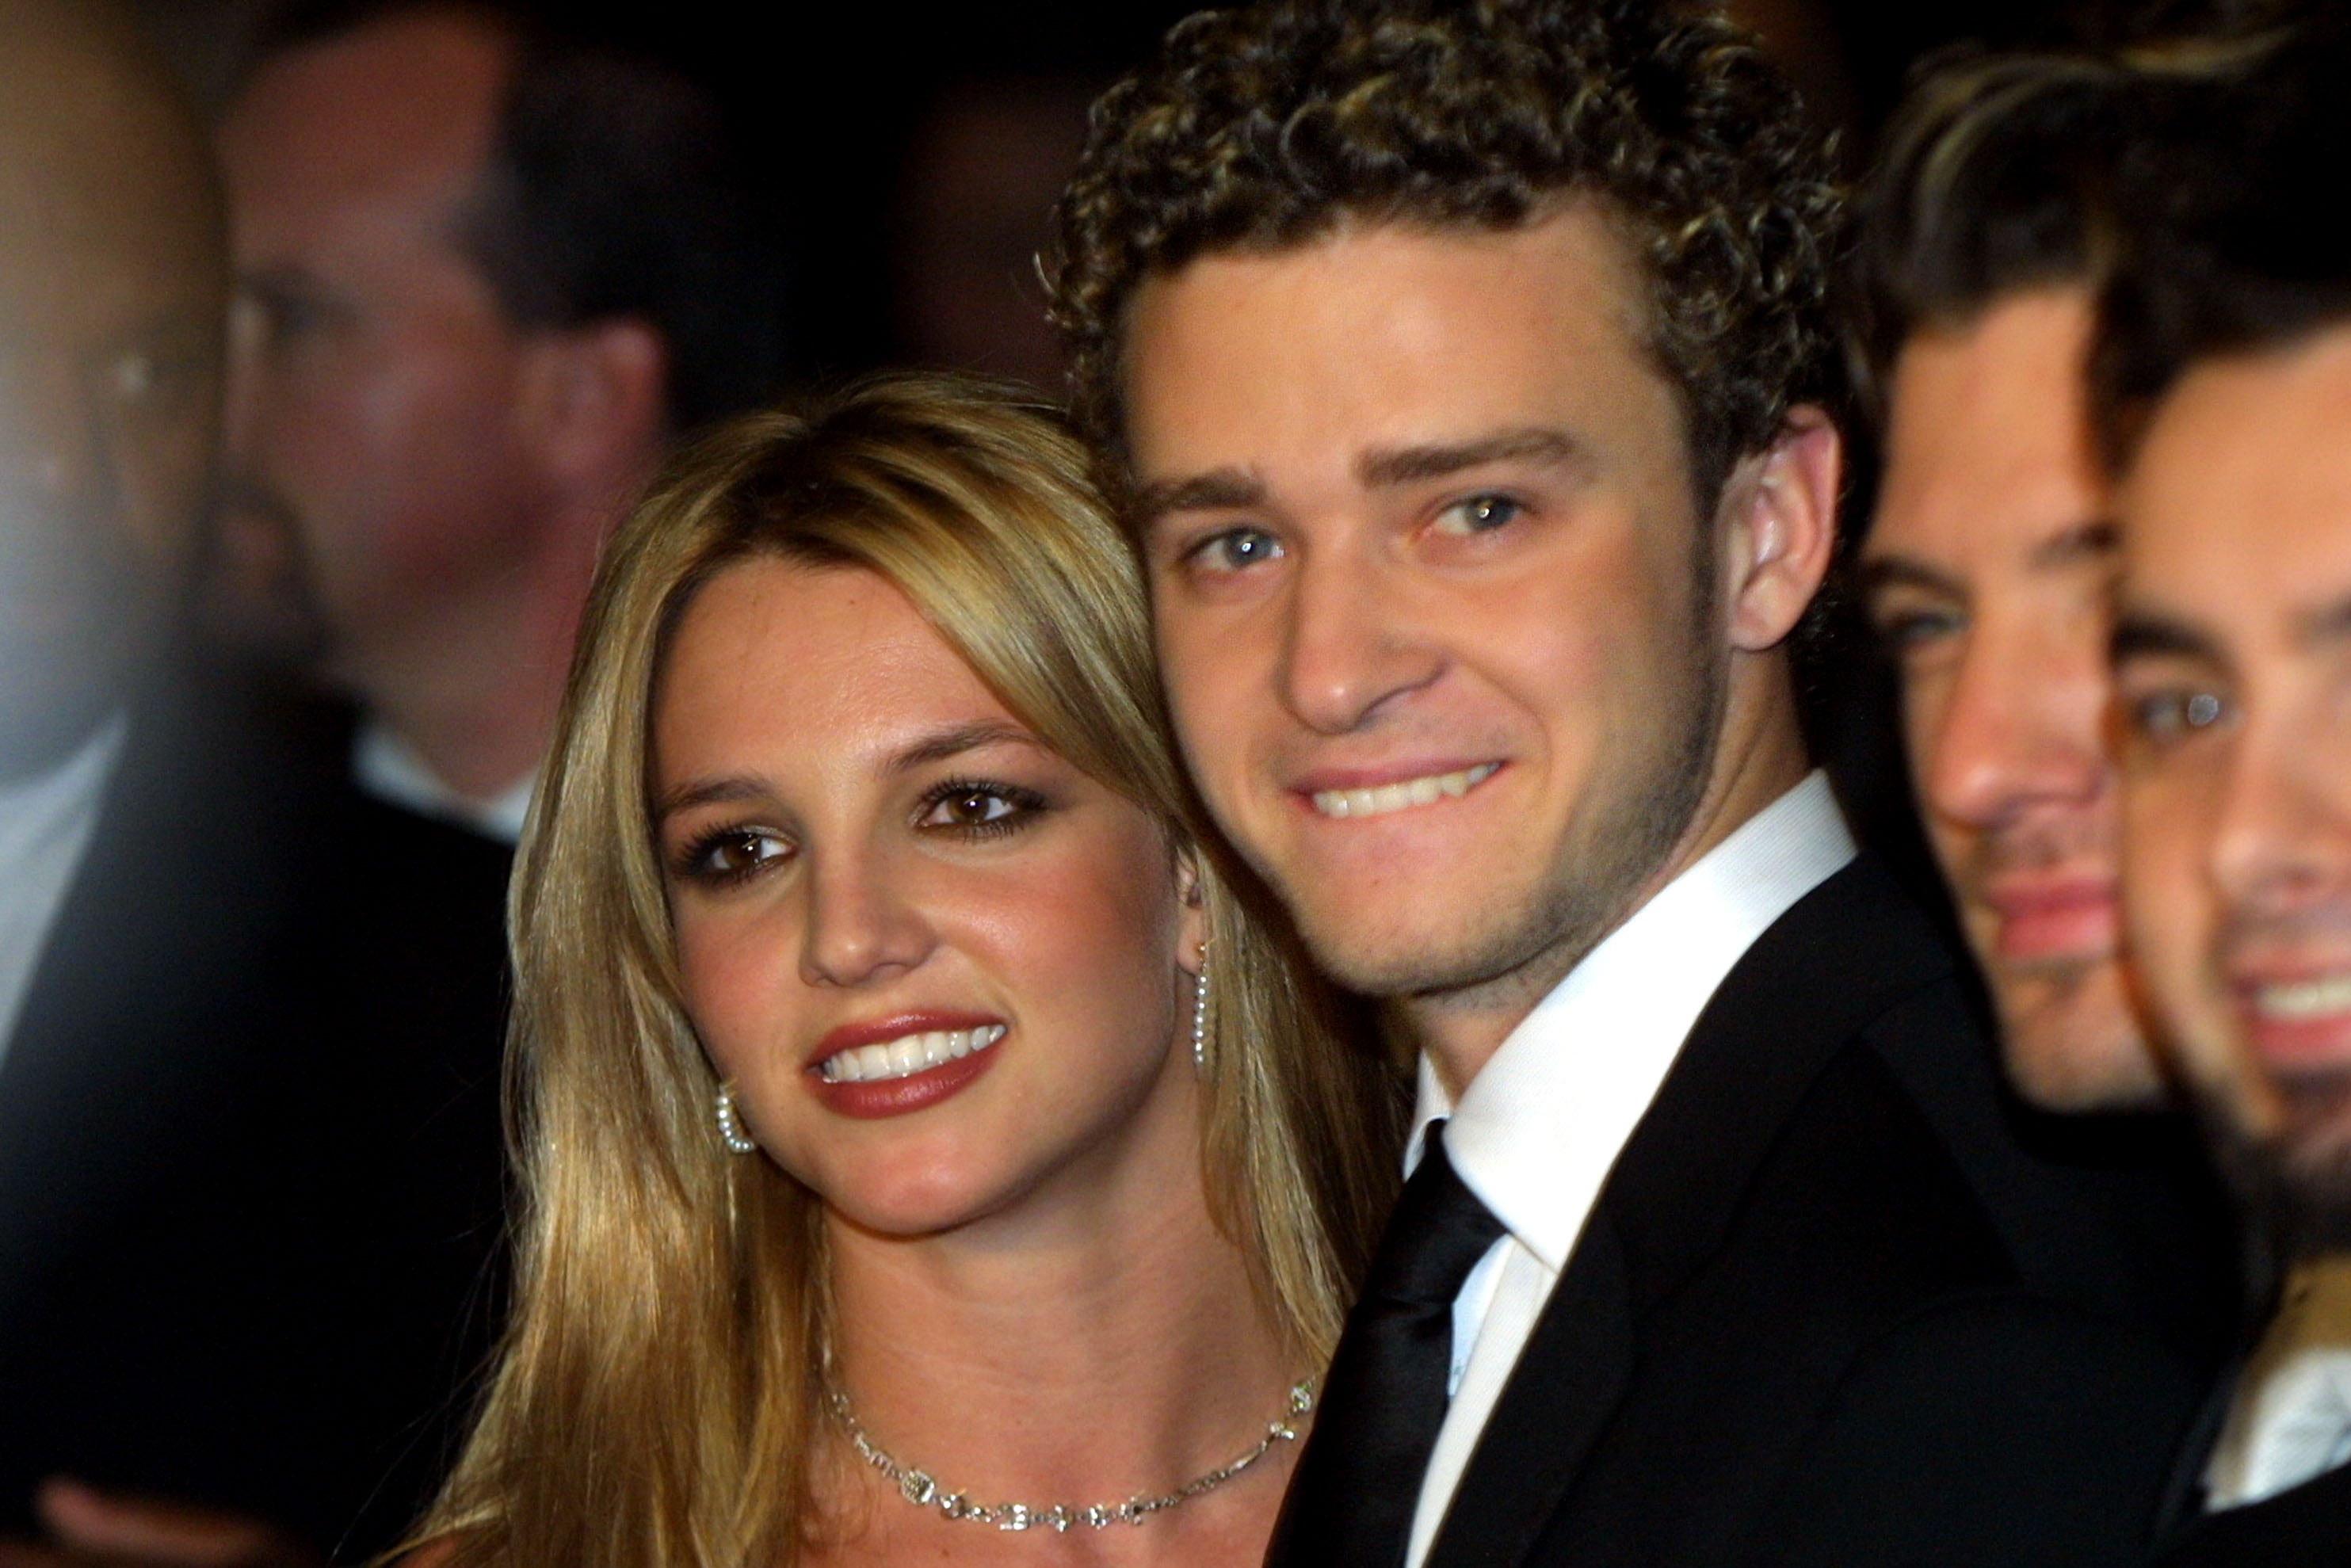 Spears and Timberlake dated from 1998 until 2002